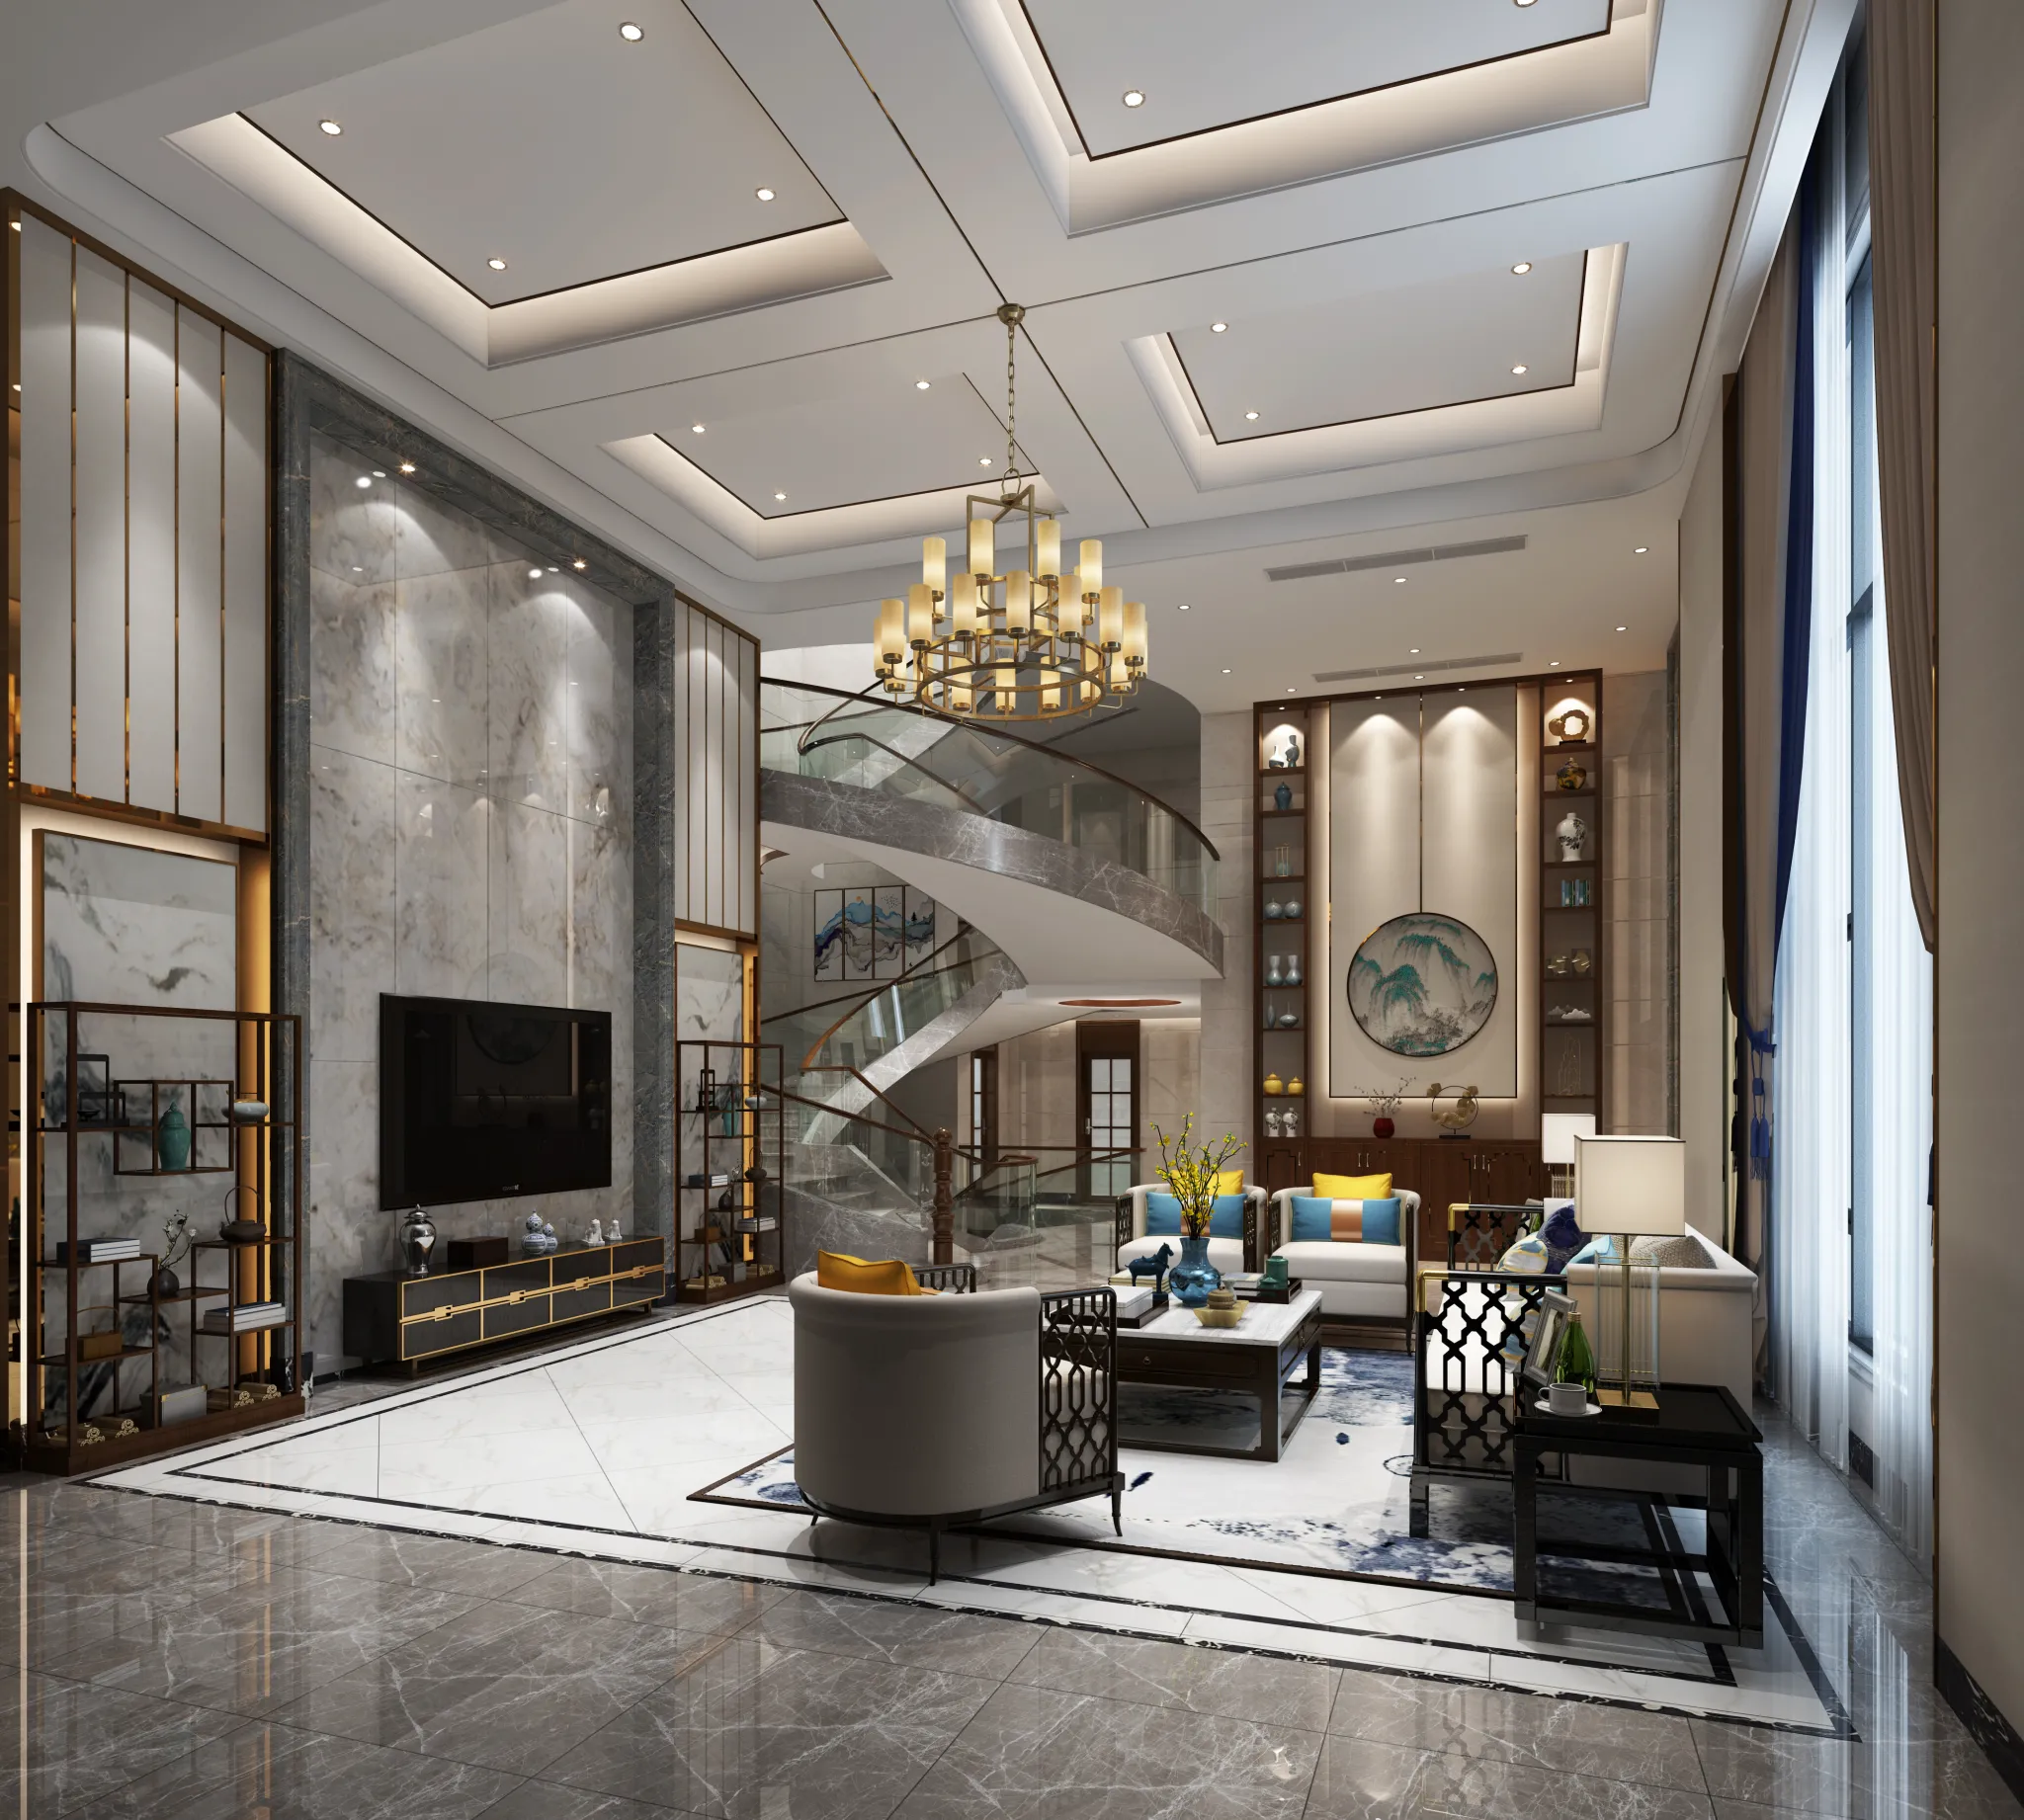 DESMOD INTERIOR 2021 (VRAY) – 4. LIVING ROOM – CHINESE – 019